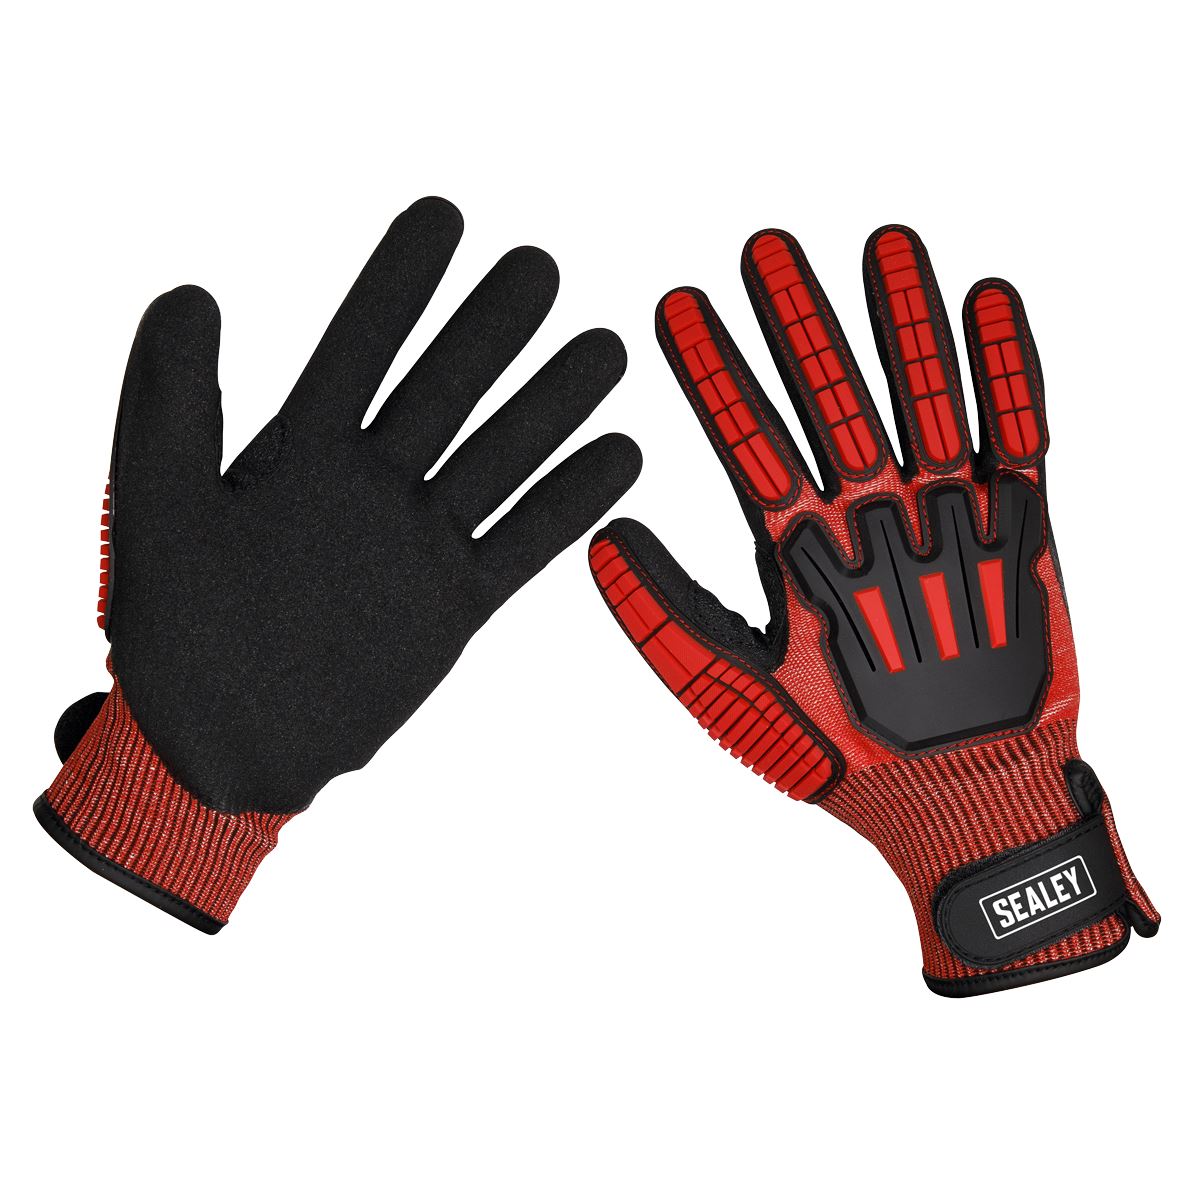 Sealey Cut & Impact Resistant Gloves - X-Large - Pair